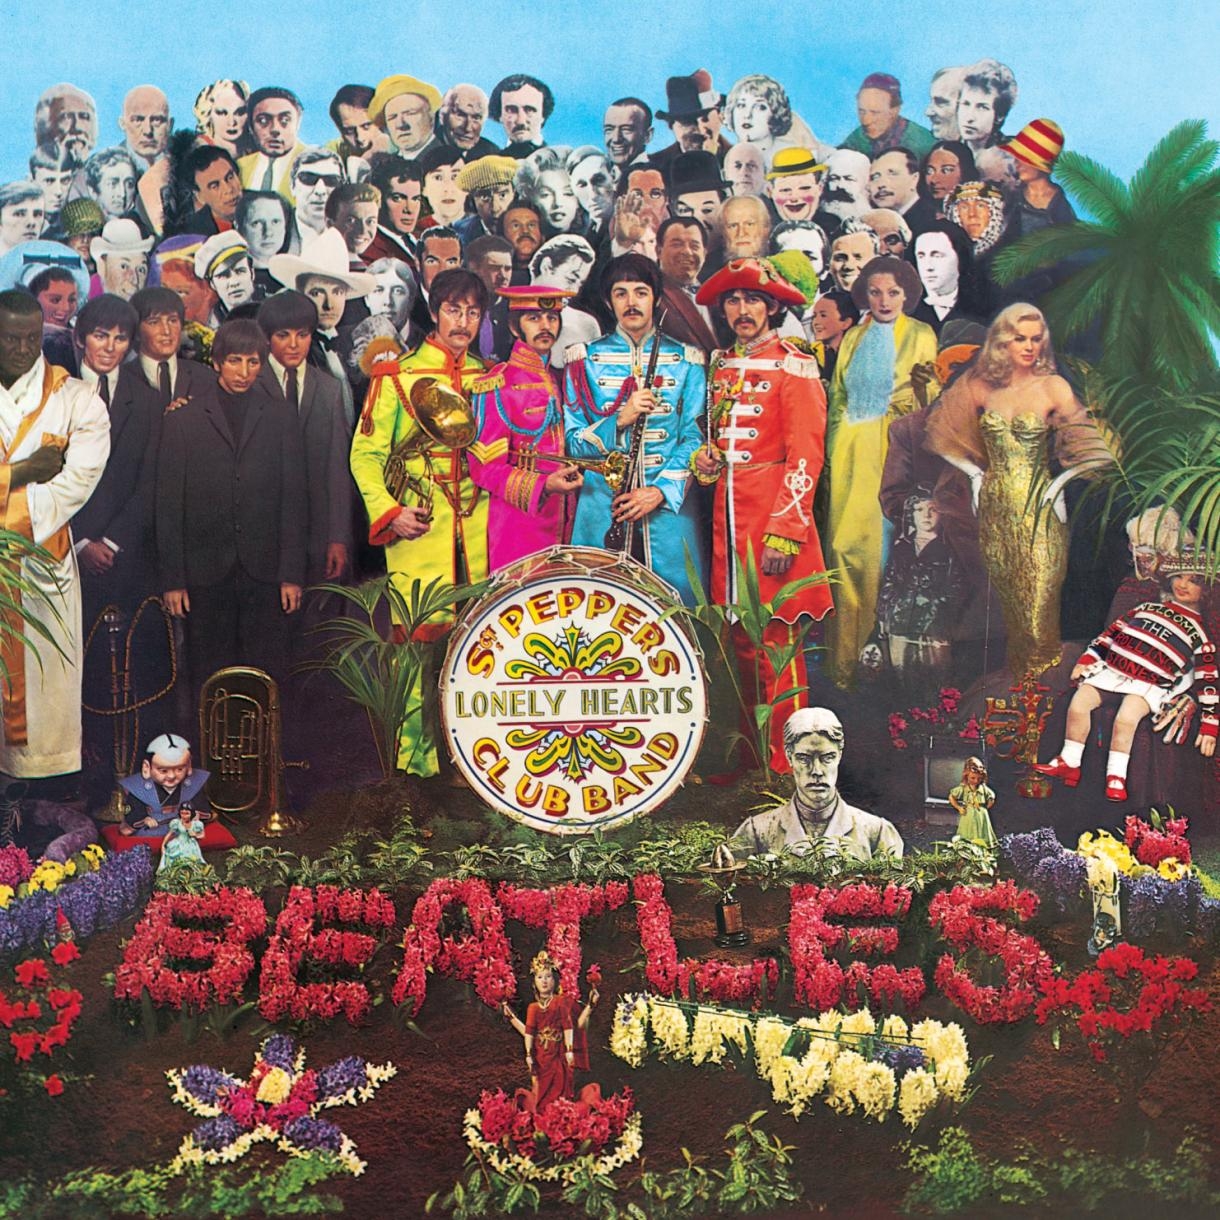 The Beatles   Sgt. Peppers Lonely Hearts Club Band